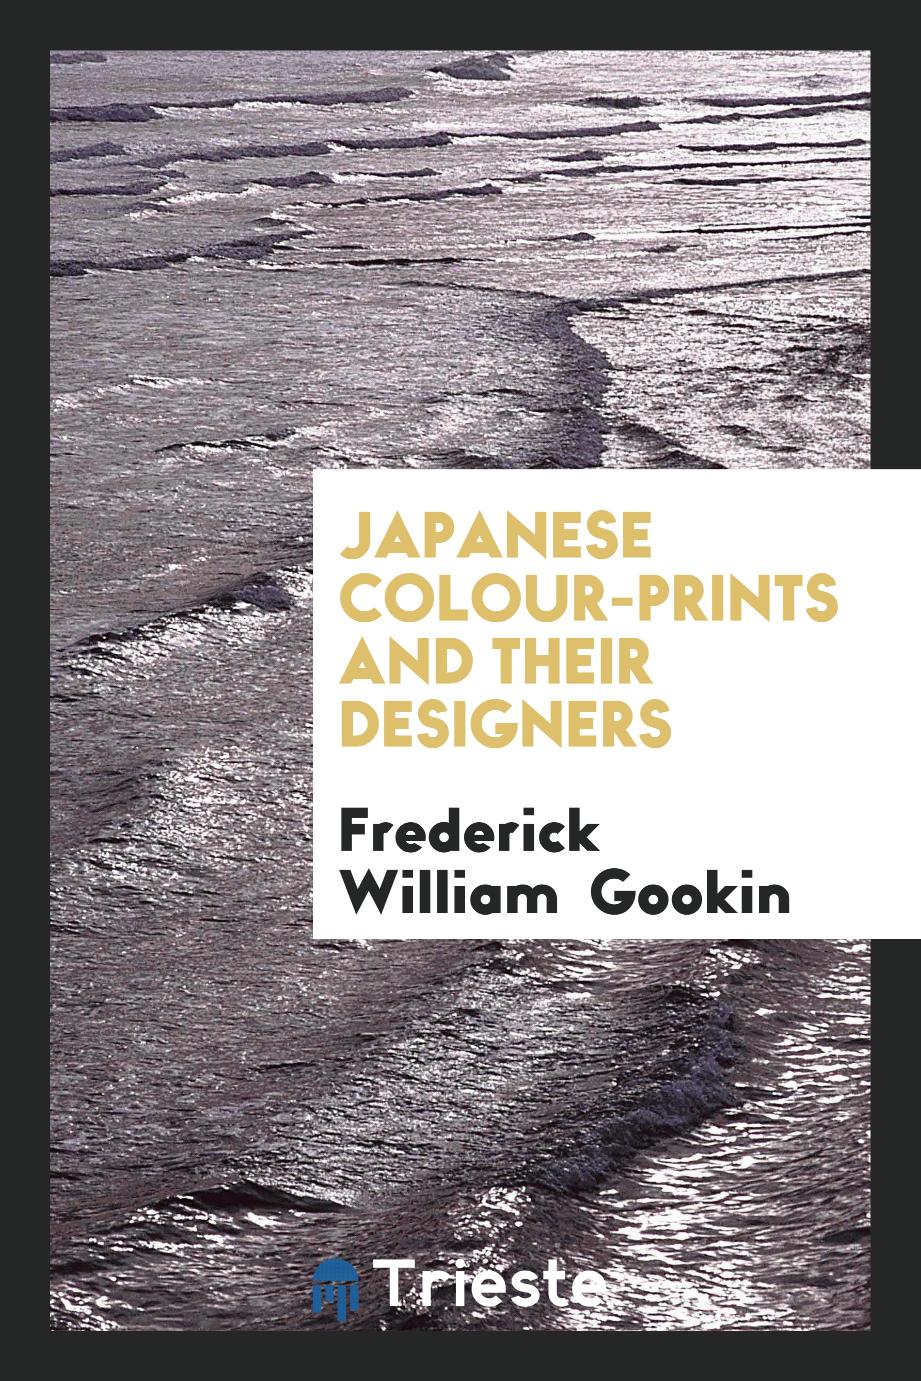 Frederick William Gookin - Japanese Colour-Prints and Their Designers